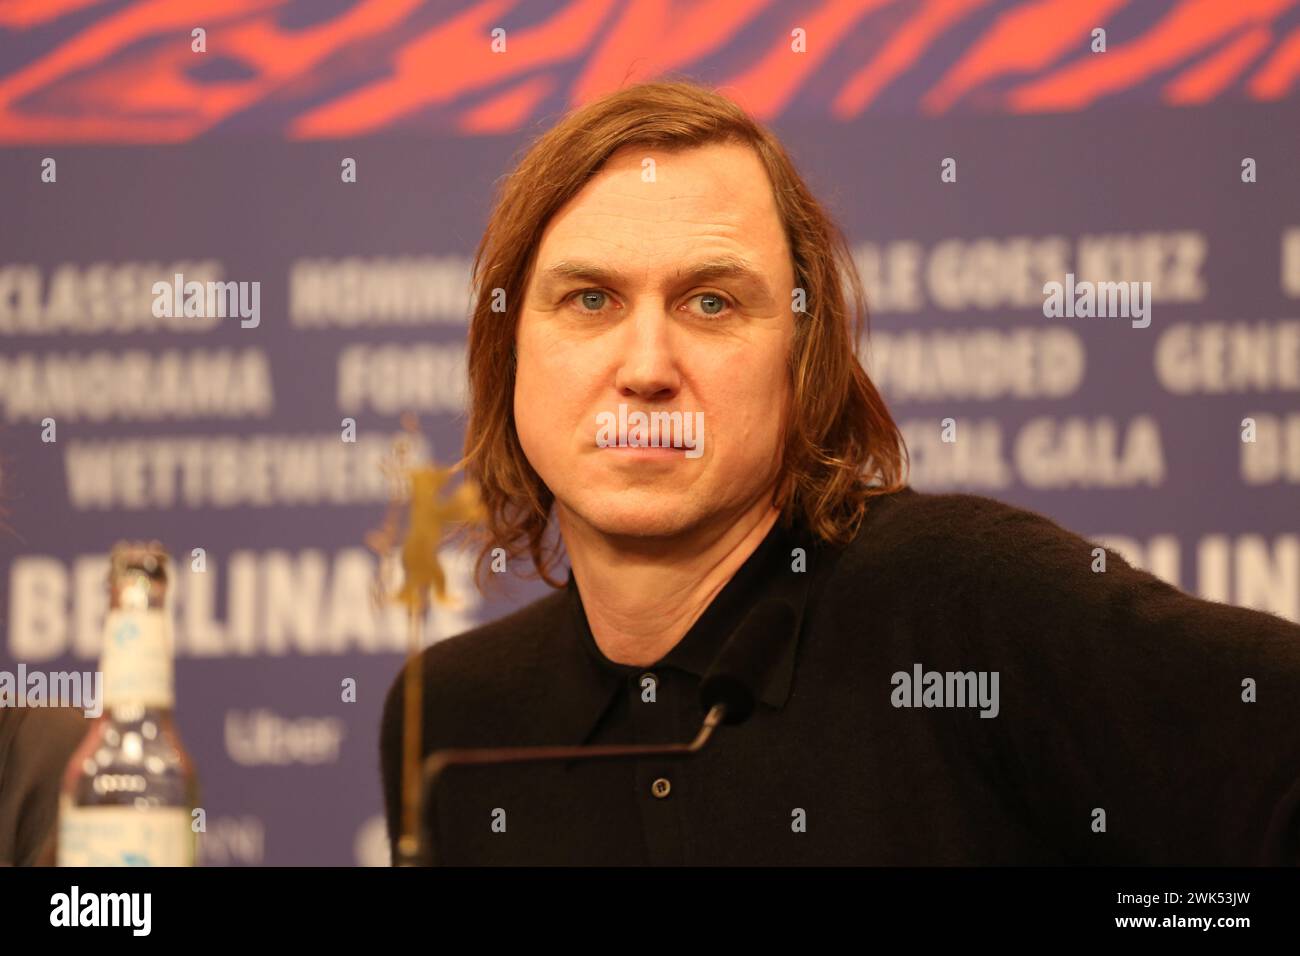 Berlin, Germany, 18th February 2024, Actor Lars Eidinger at the press conference for the film Dying (Sterben) at the 74th Berlinale International Film Festival. Photo Credit: Doreen Kennedy / Alamy Live News. Stock Photo